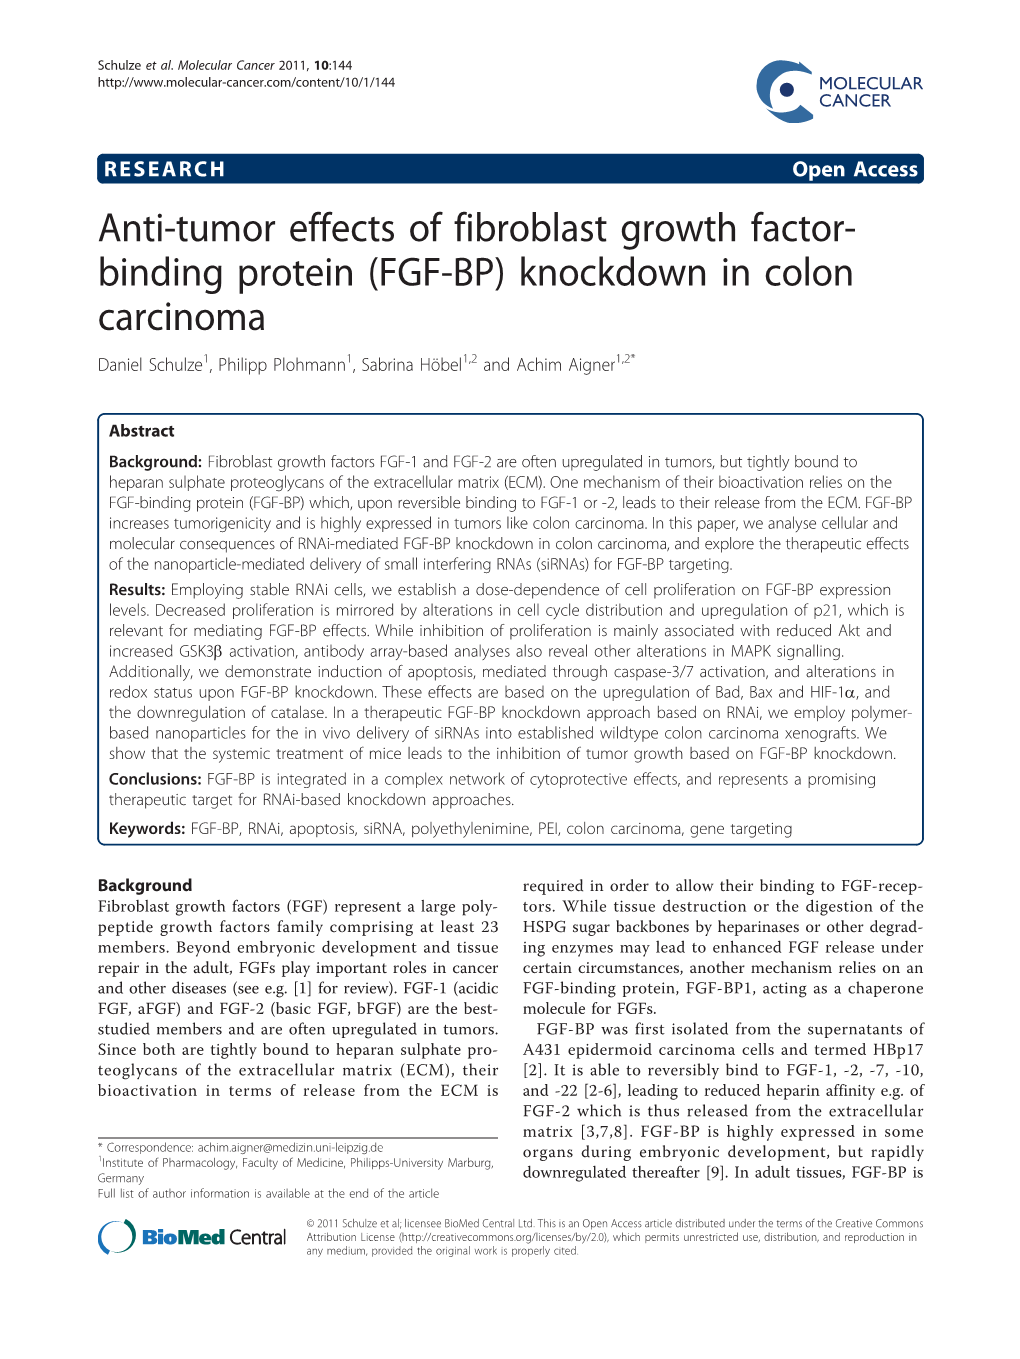 Anti-Tumor Effects of Fibroblast Growth Factor- Binding Protein (FGF-BP